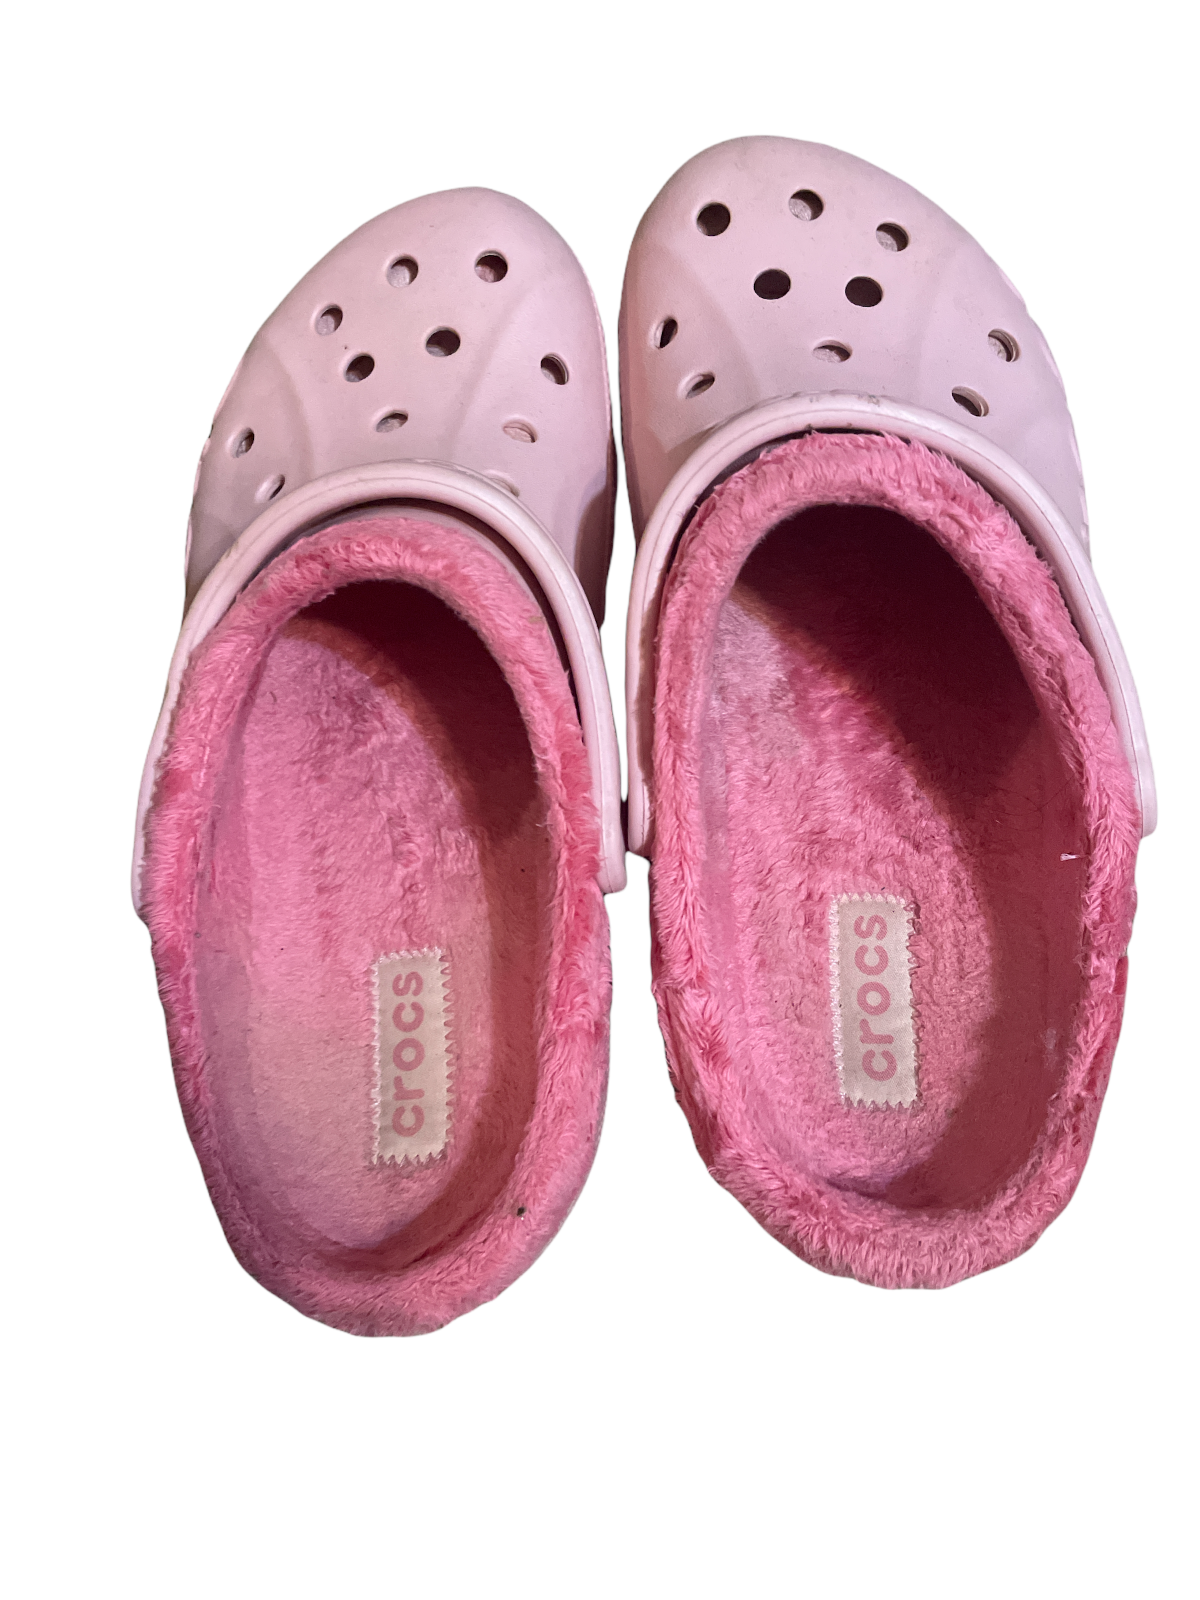 Classic Crocs Pink Faux Fur Lined Dual and 50 similar items